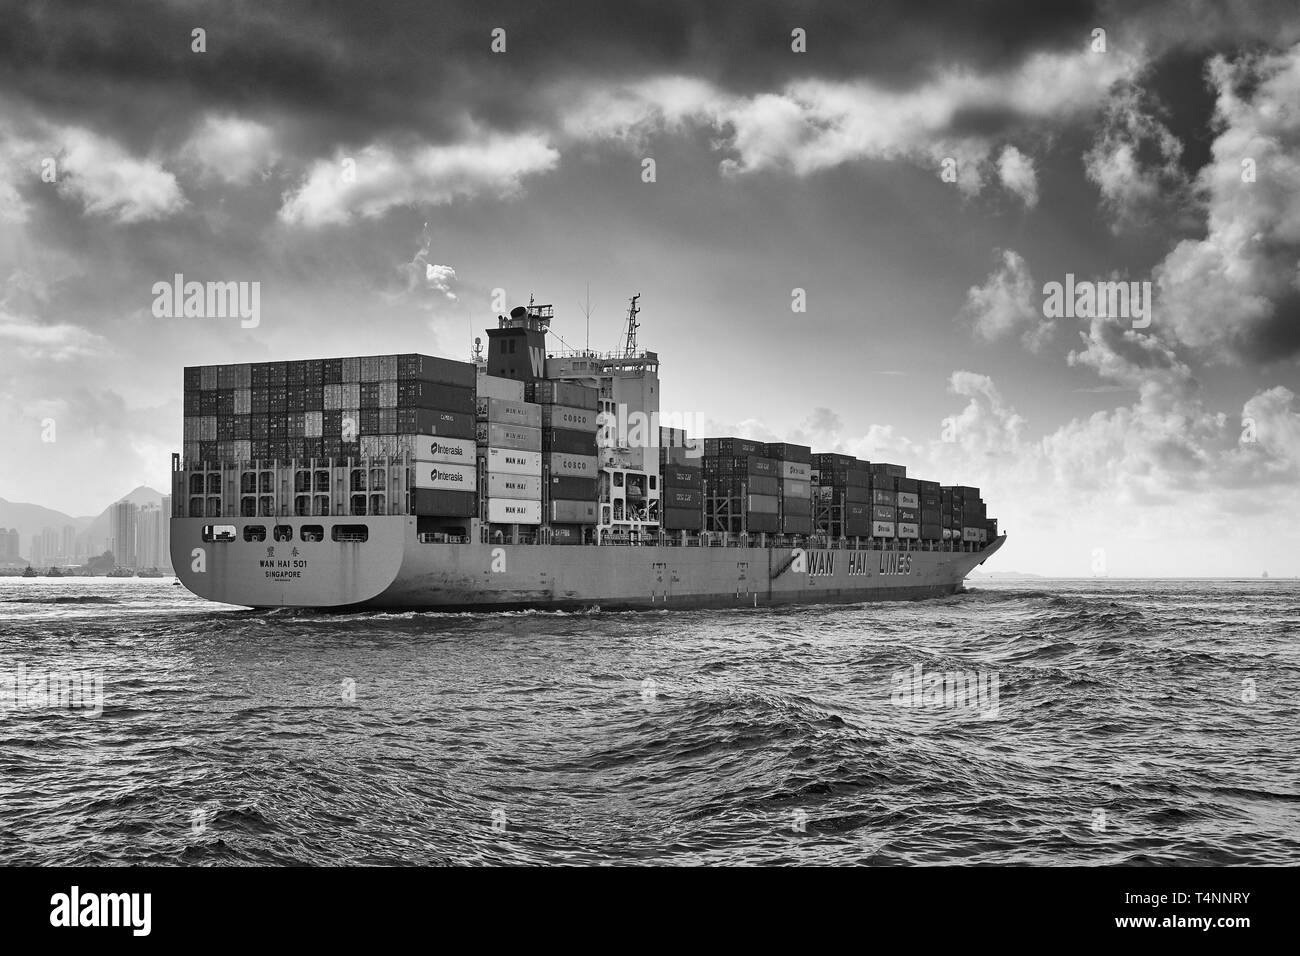 Moody Black And White Photo Of A WAN HAI LINES Container Ship, WAN HAI 501, Entering The Busy East Lamma Channel As She Leaves Hong Kong Stock Photo